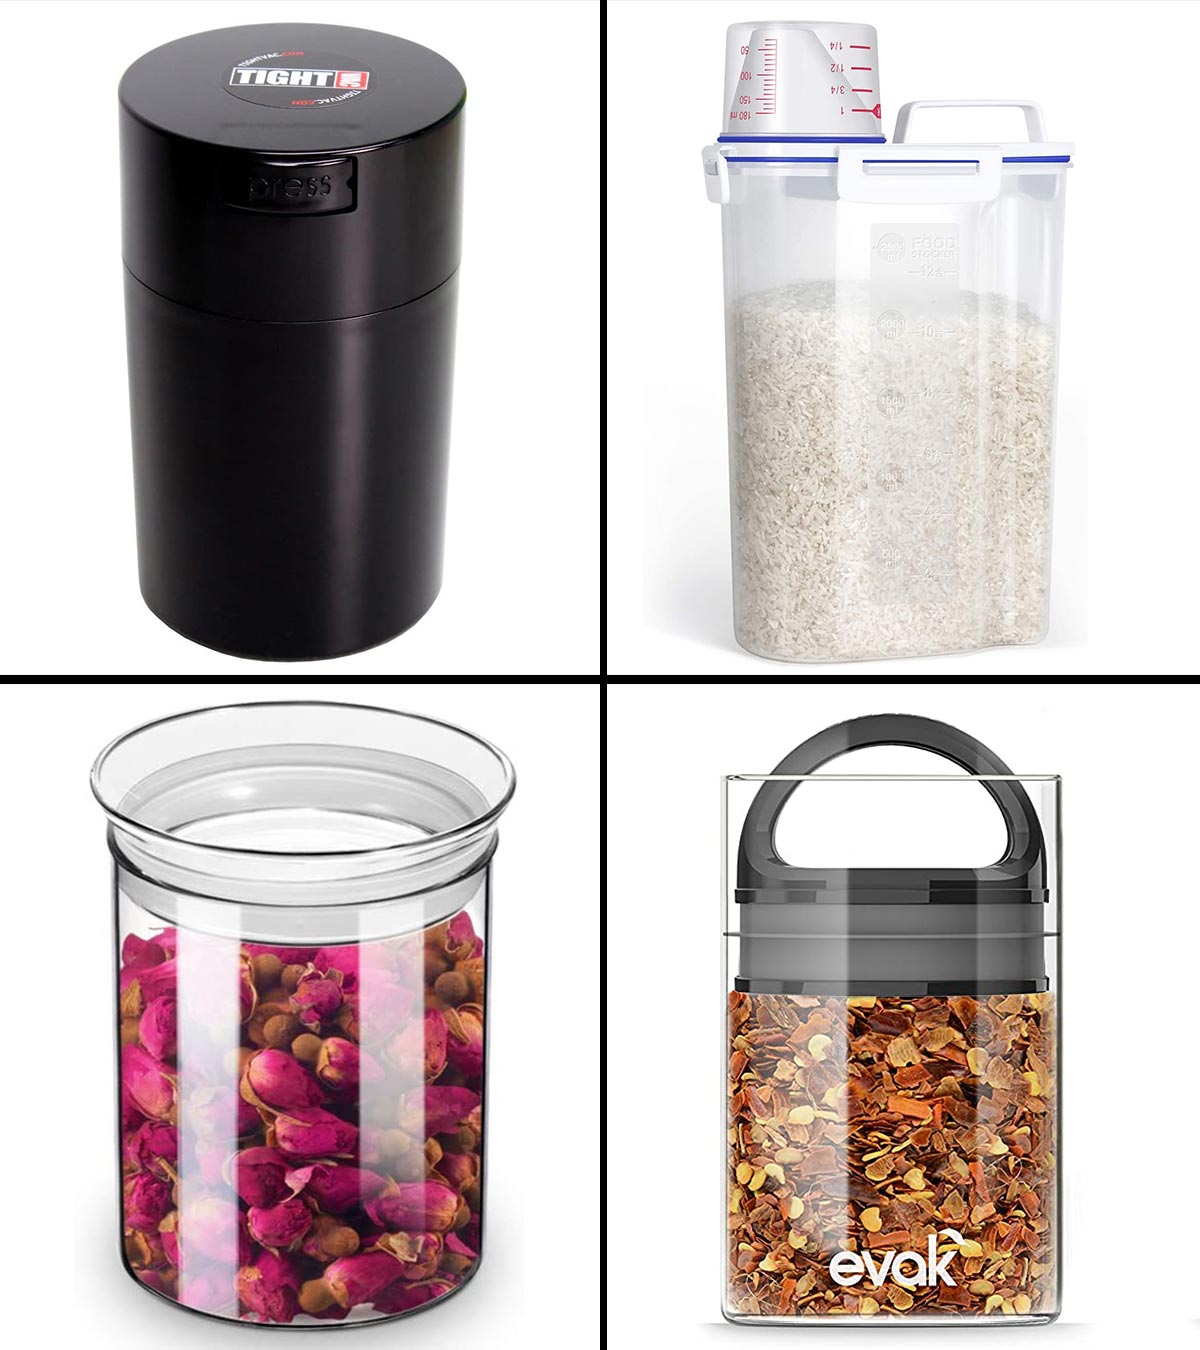 DWELLZA KITCHEN Food Storage Canisters with Airtight Lids – All About Tidy